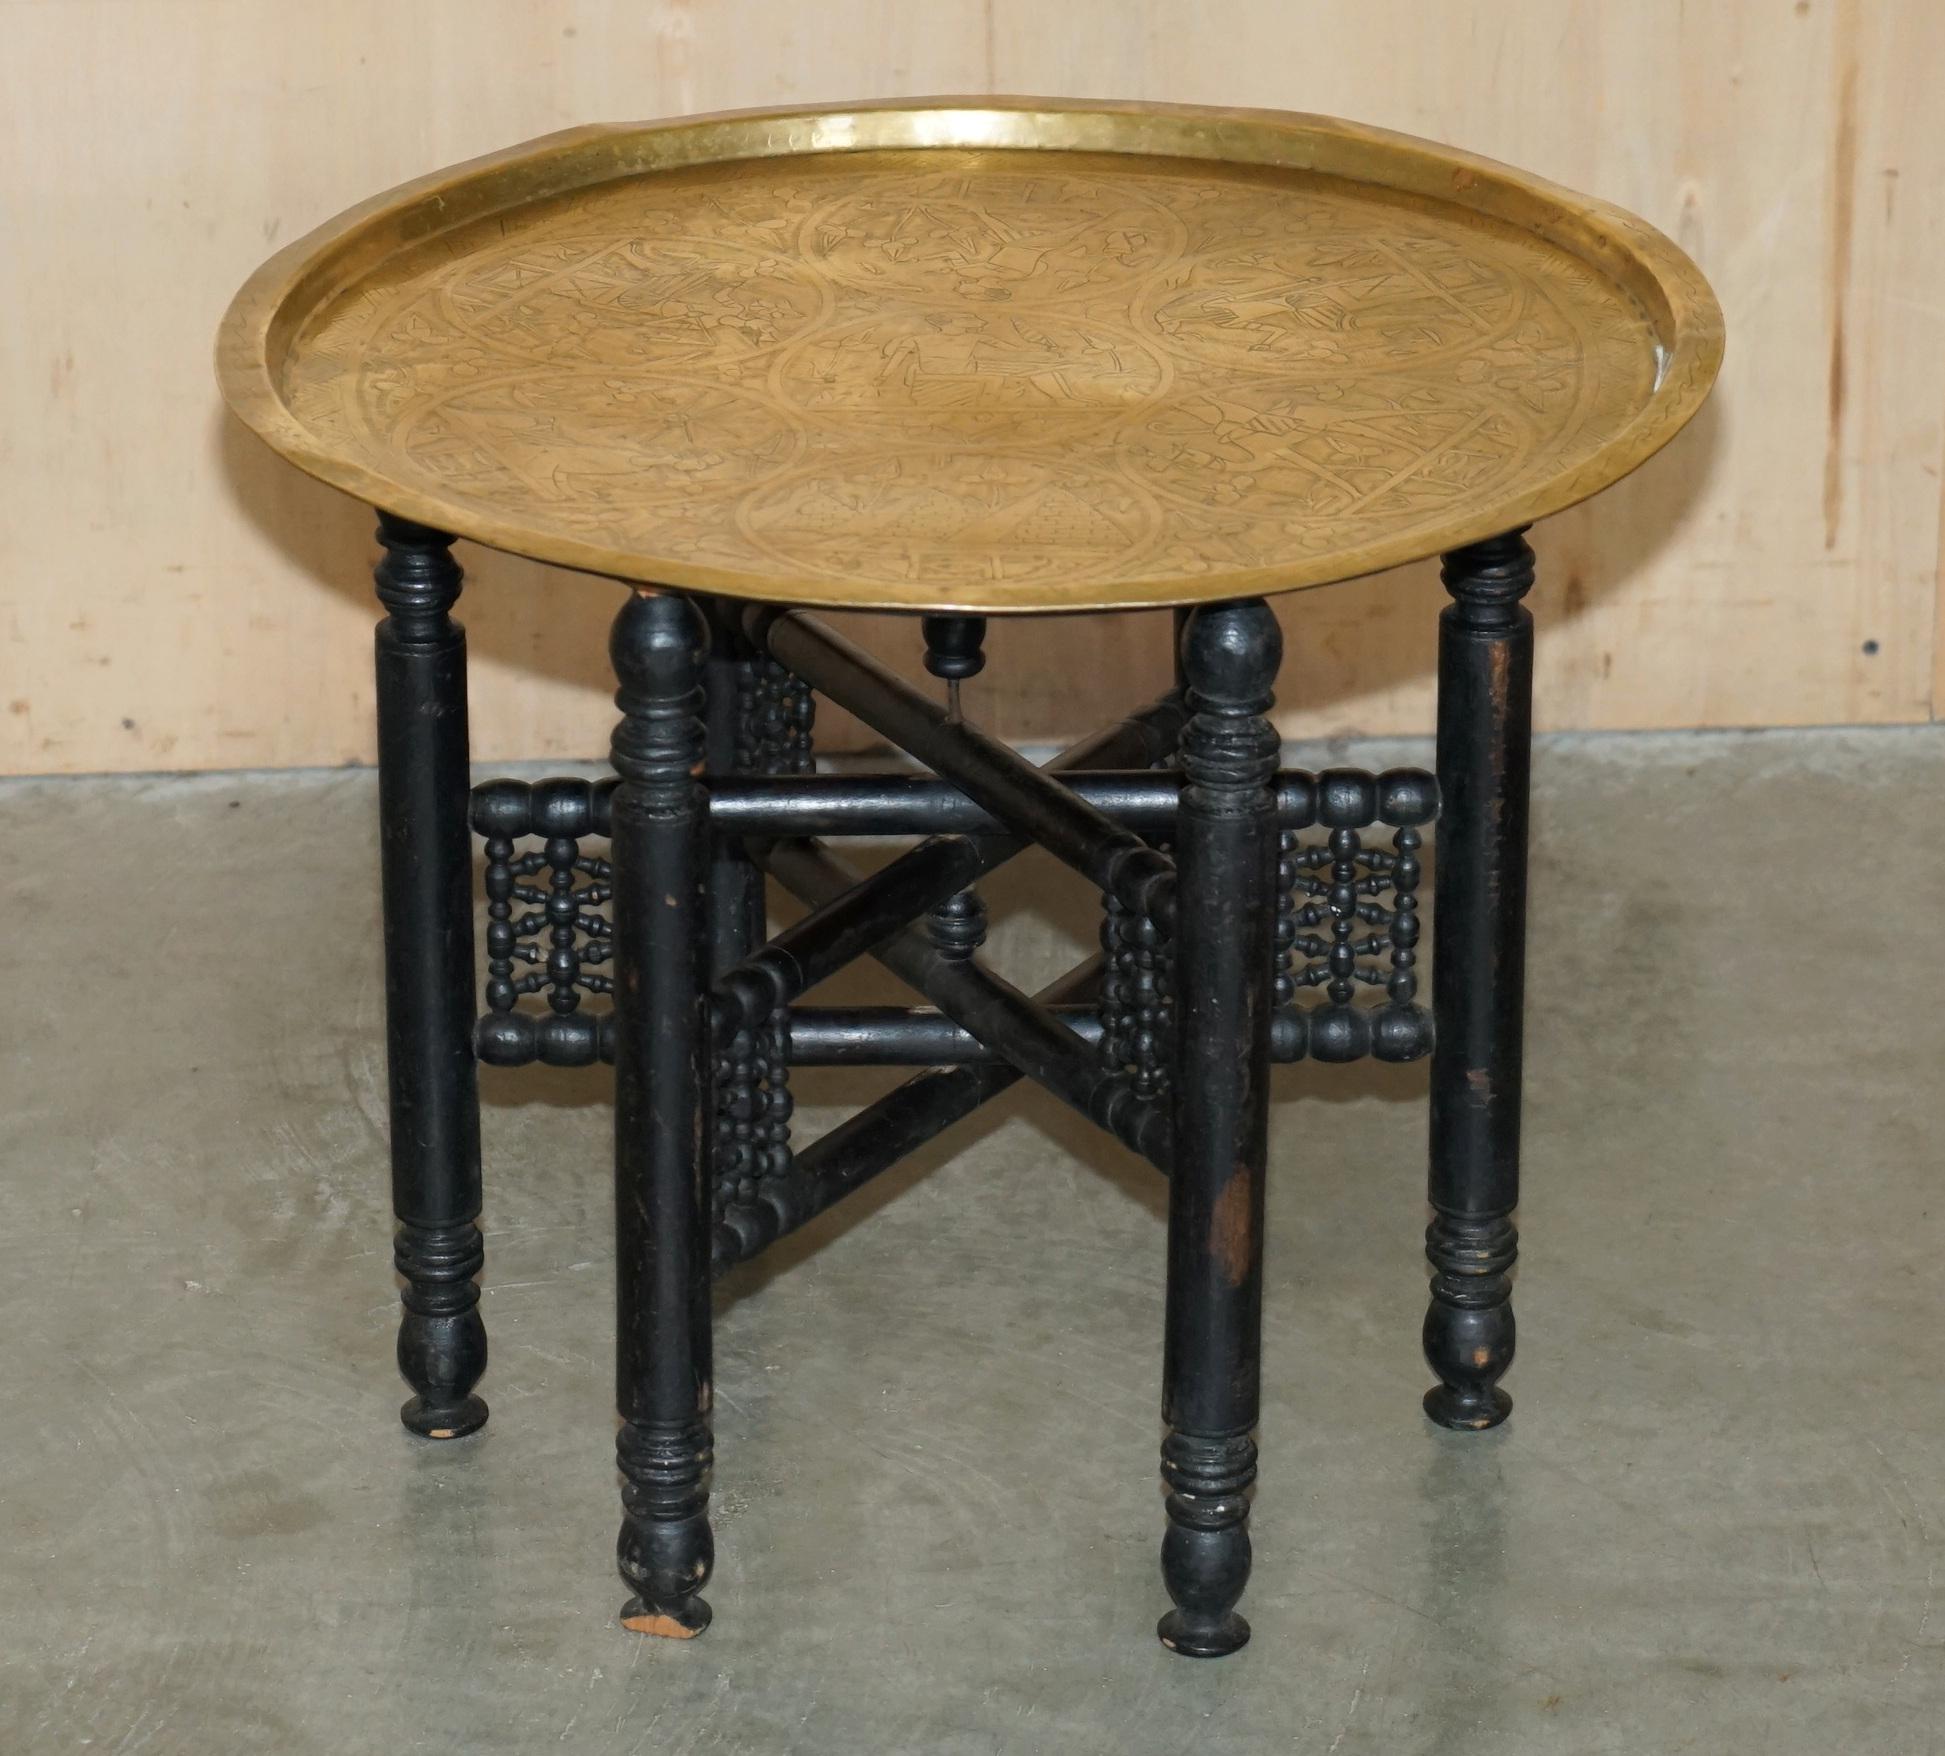 Royal House Antiques

Royal House Antiques is delighted to offer for sale this stunning Burmese Folding tray table with rare engraved top depicting Egyptian figures circa 1920's retailed through Liberty's London

Please note the delivery fee listed